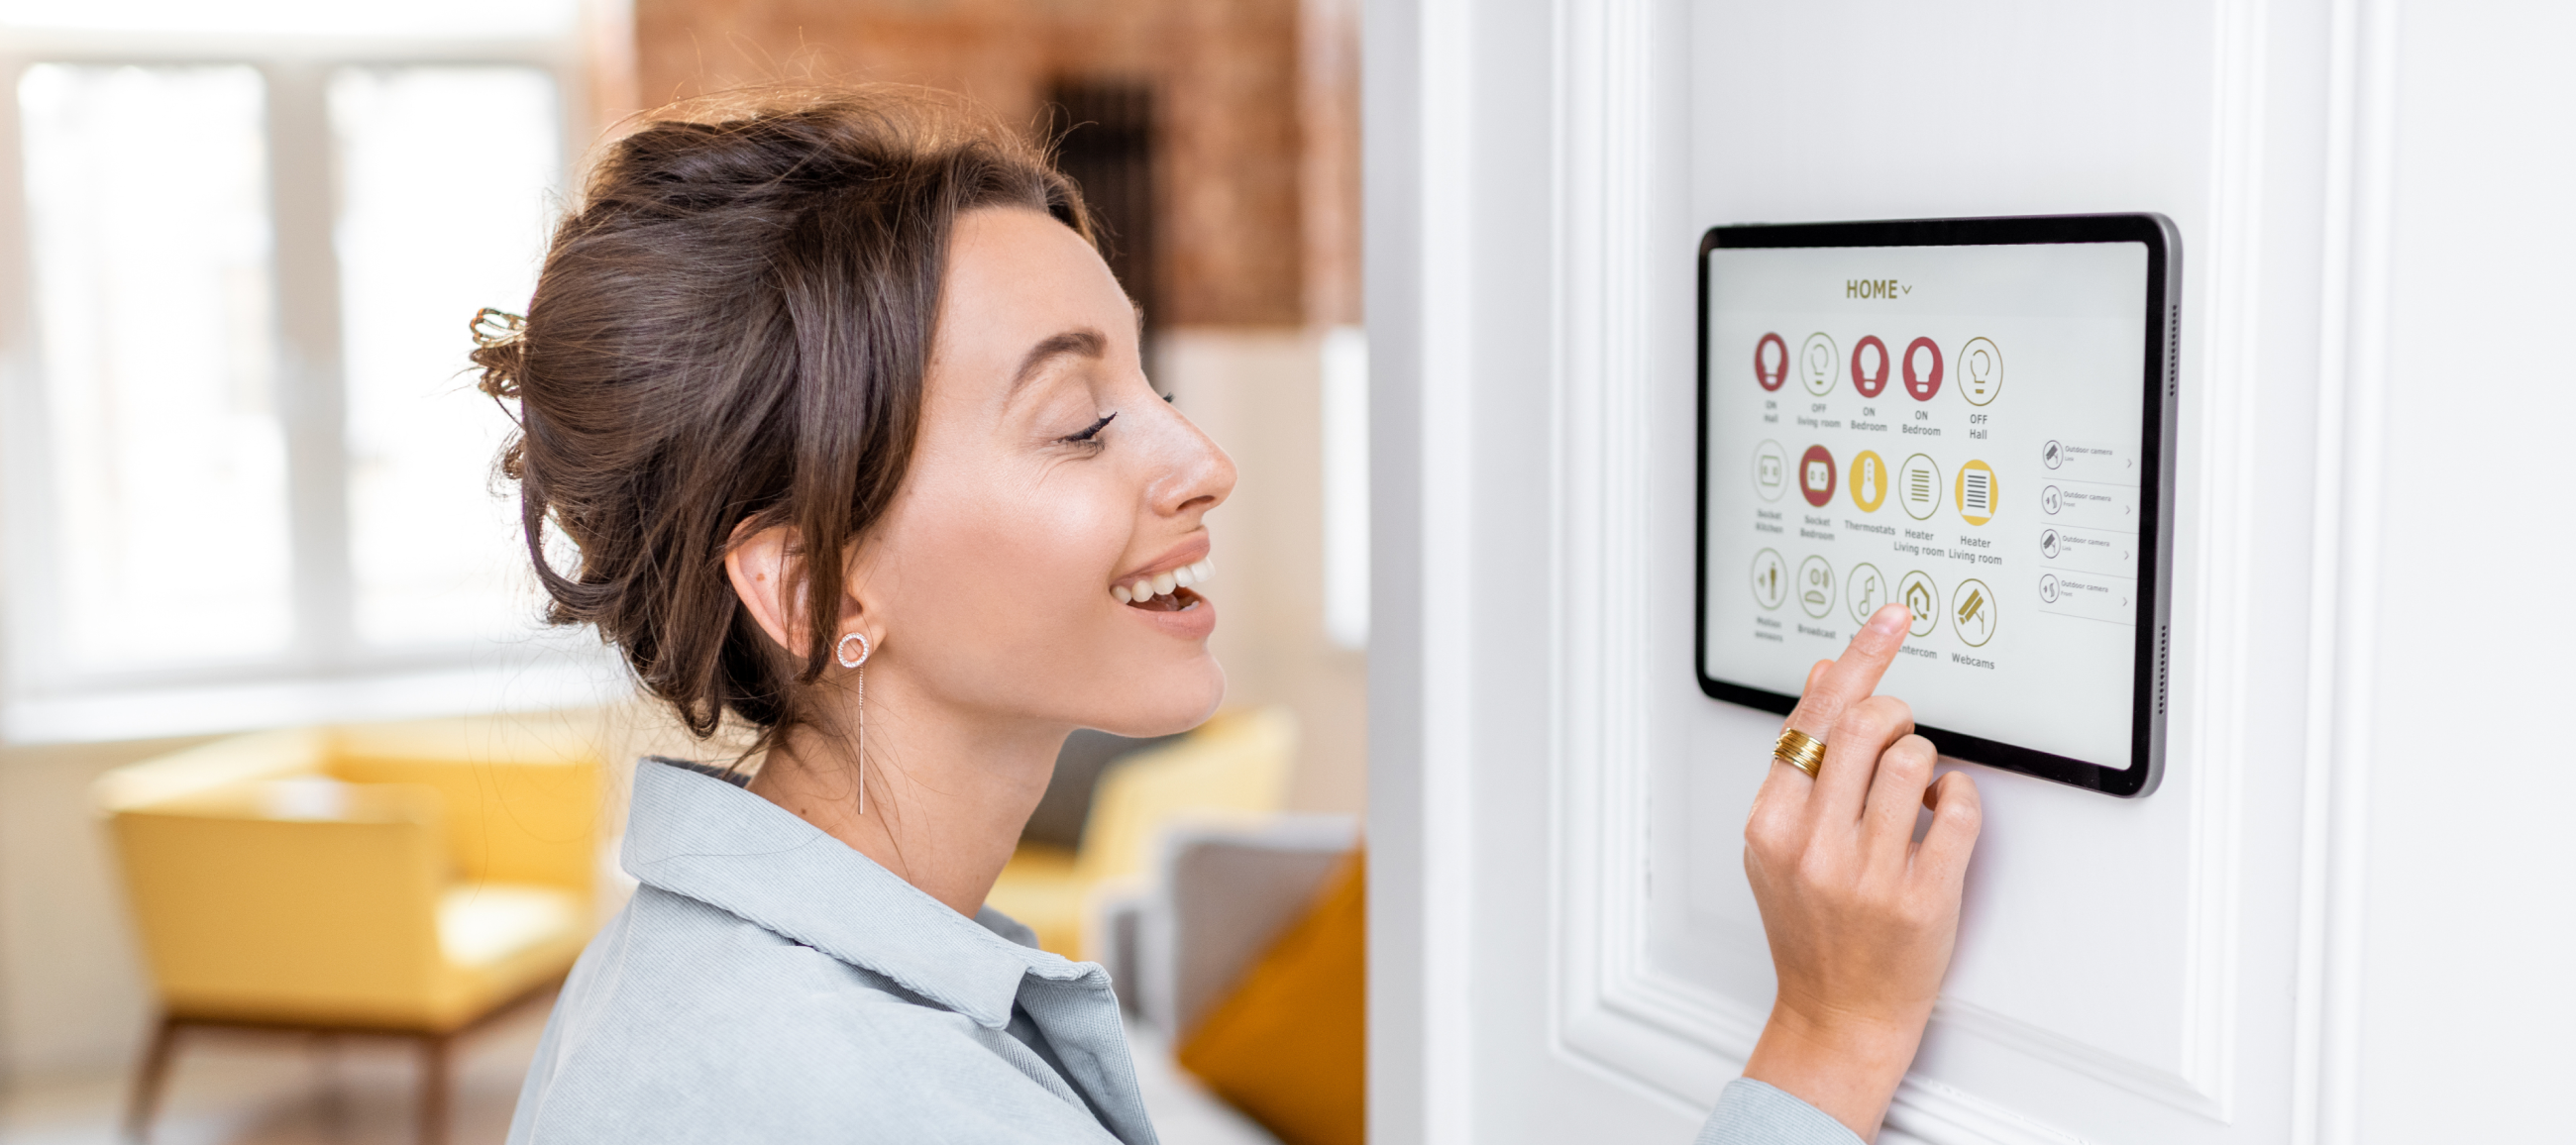 Secure your home with smart tech